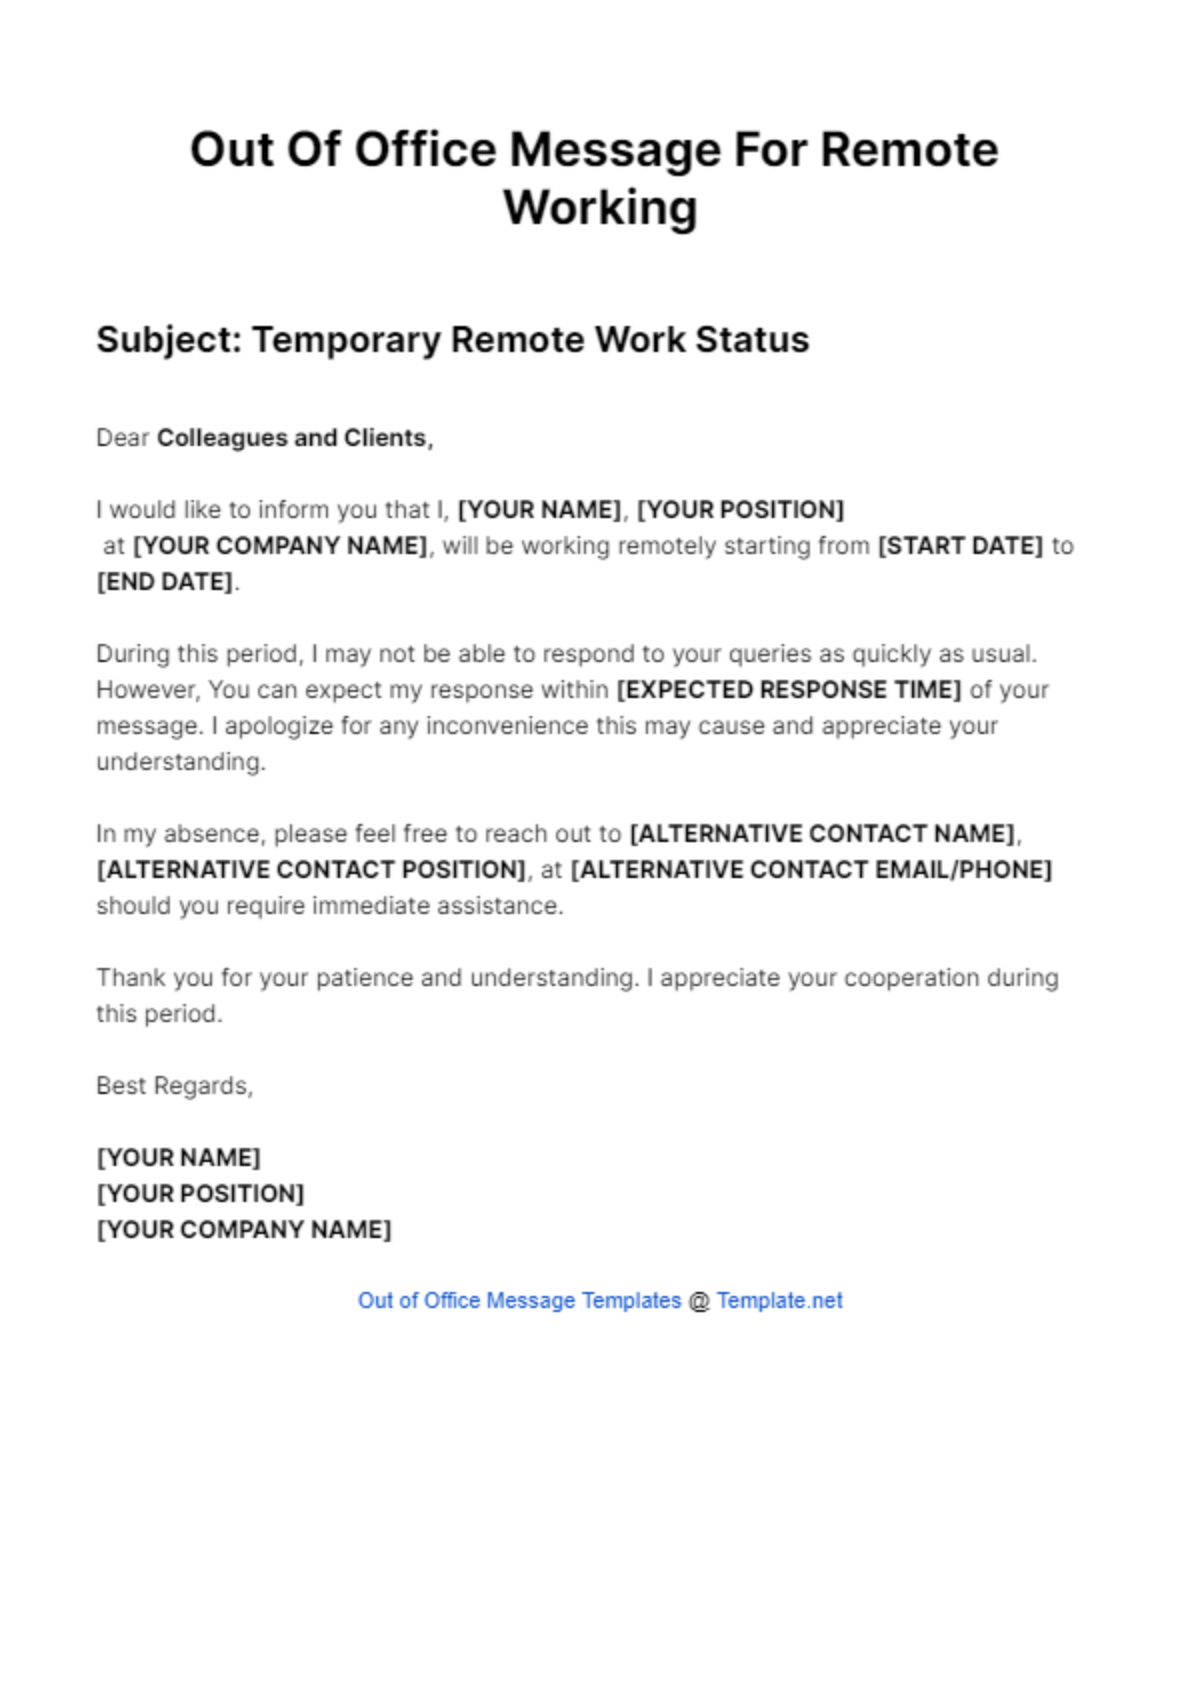 Out Of Office Message For Remote Working Template